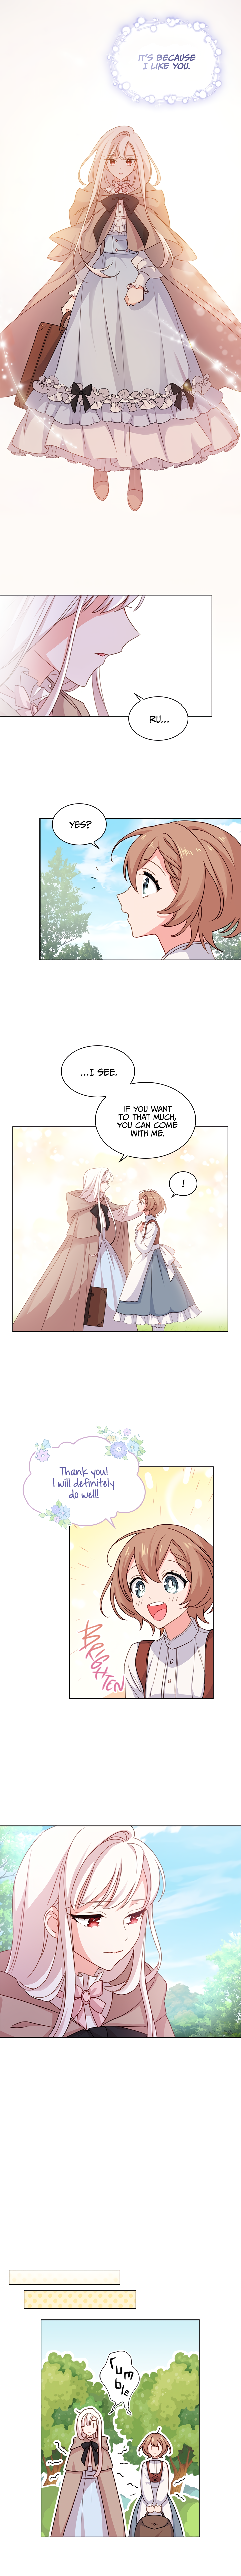 The Lady Wants to Rest Chapter 4 - Page 8